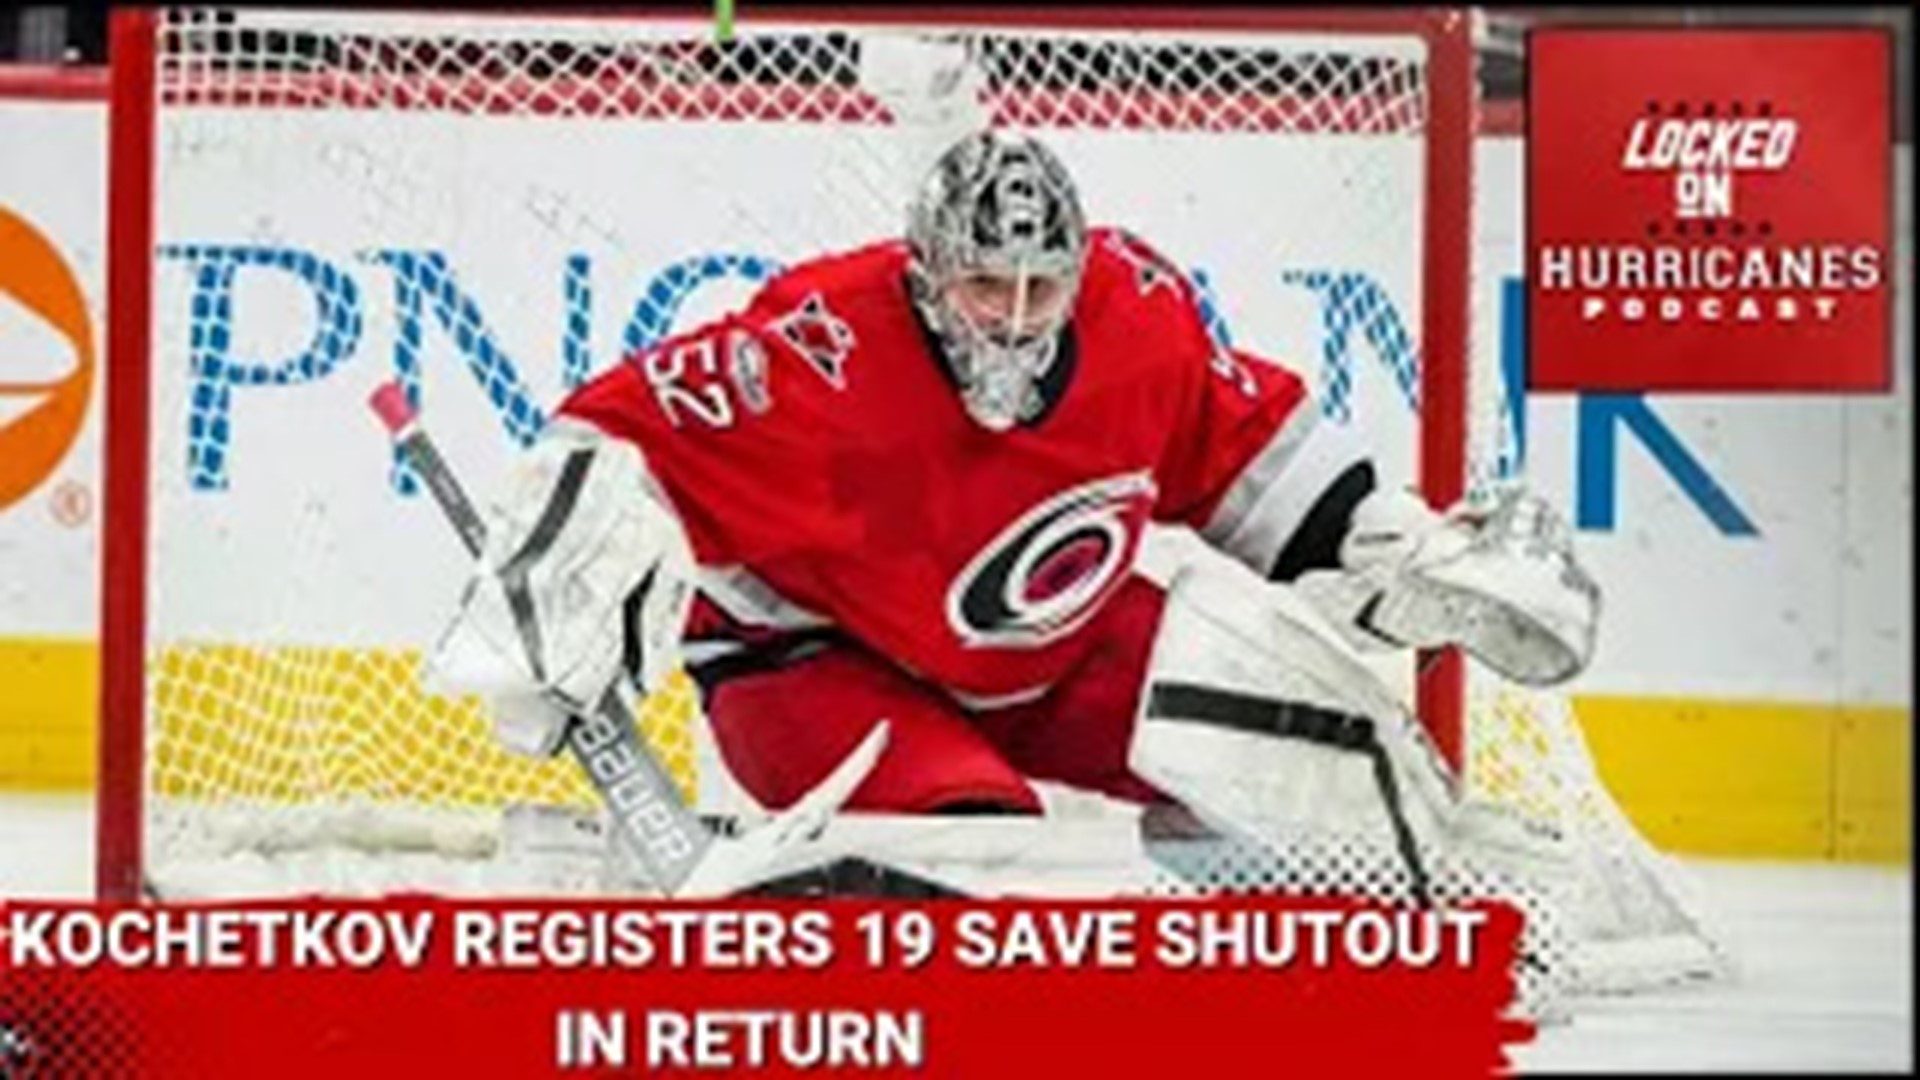 Kochetkov made his return in dramatic fashion for the Carolina Hurricanes registering a 19 save shutout over the Flyers. That and more on Locked On Hurricanes.